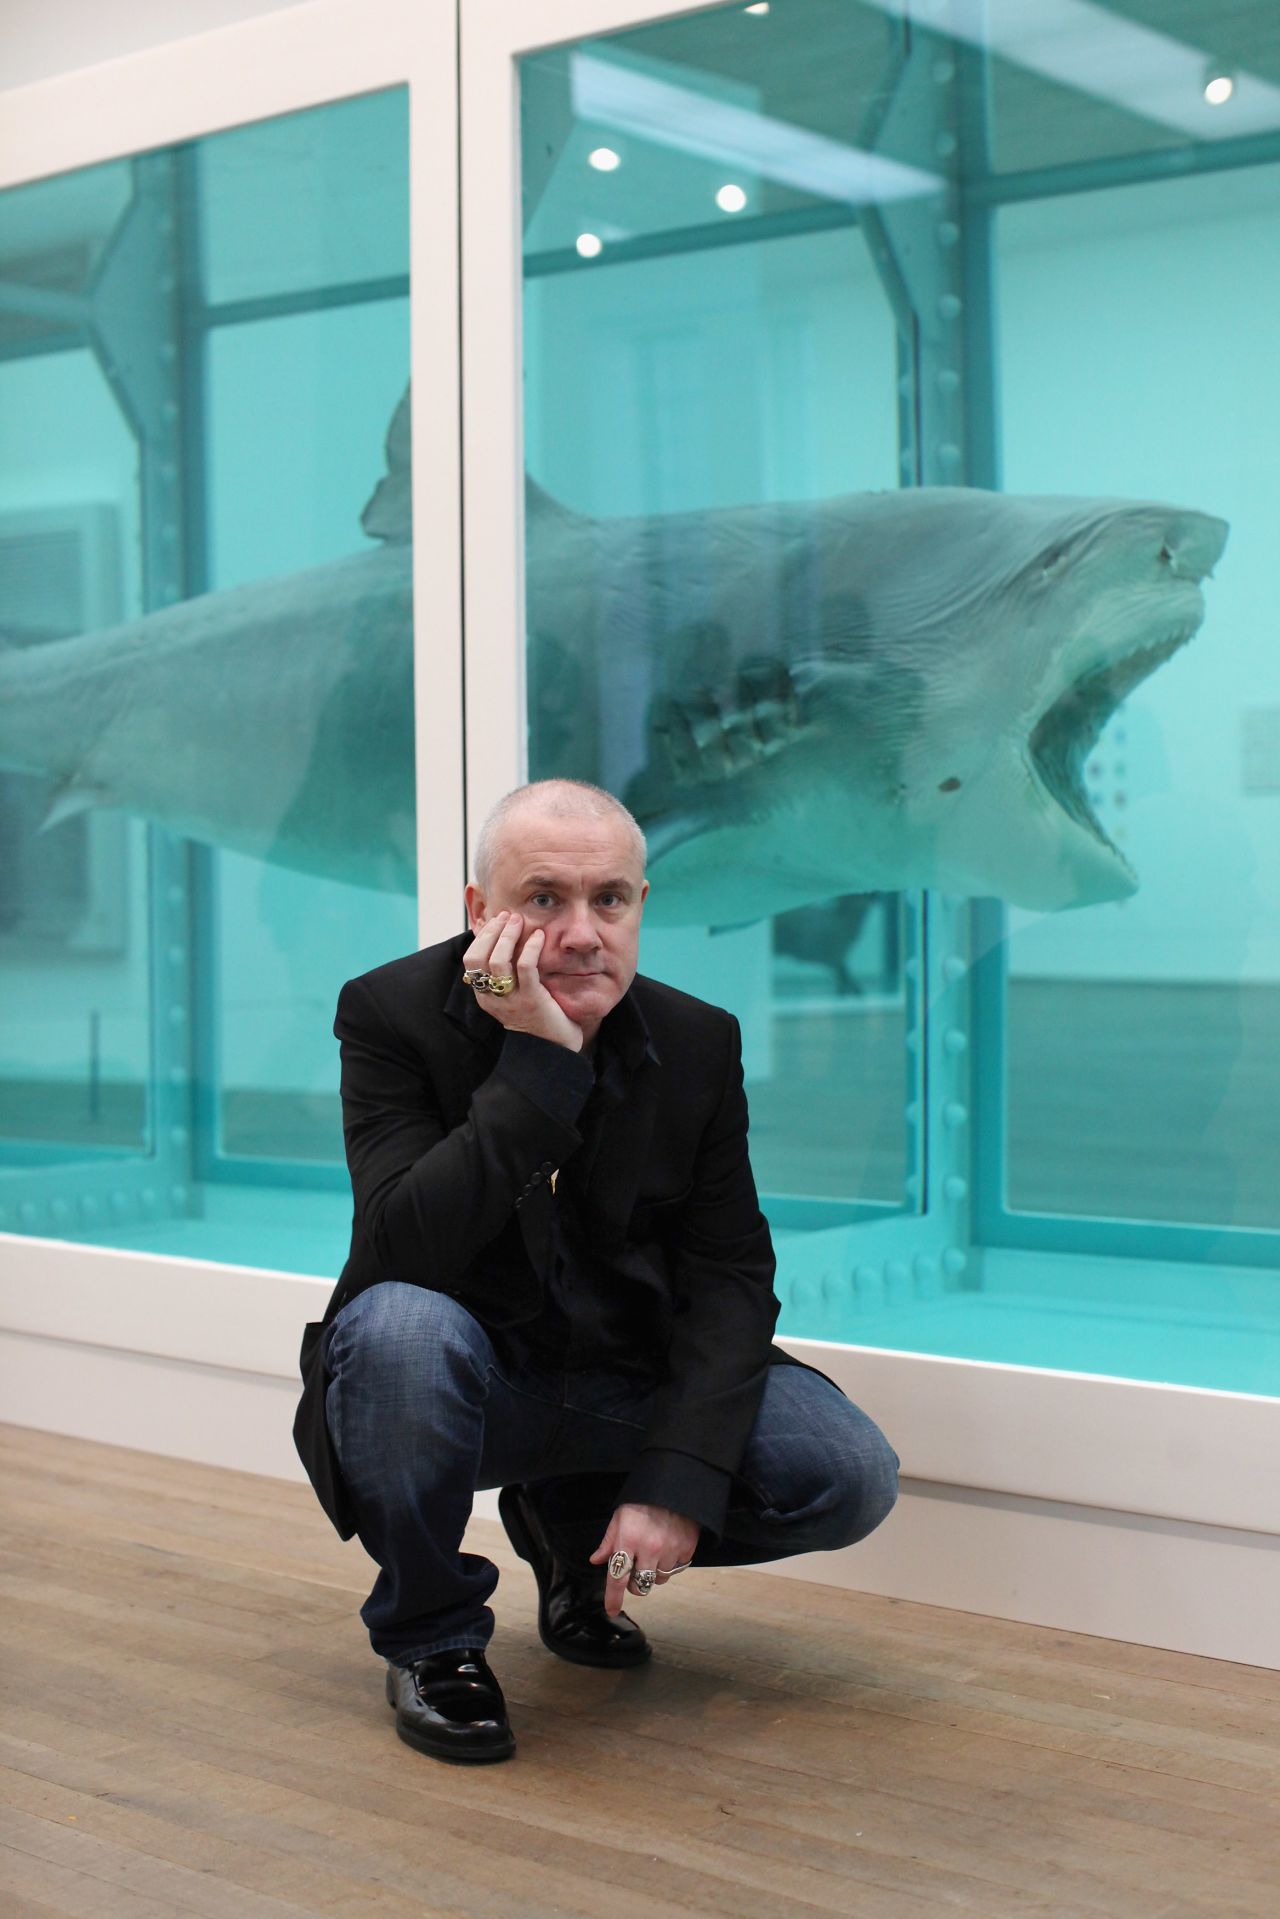 Damien Hirst, seen here in front of one of his most famous artworks, "The Physical Impossibility of Death in the Mind of Someone Living" - a shark preserved in formaldehyde - was the subject of a major retrospective at London's Tate Modern gallery in 2012. 